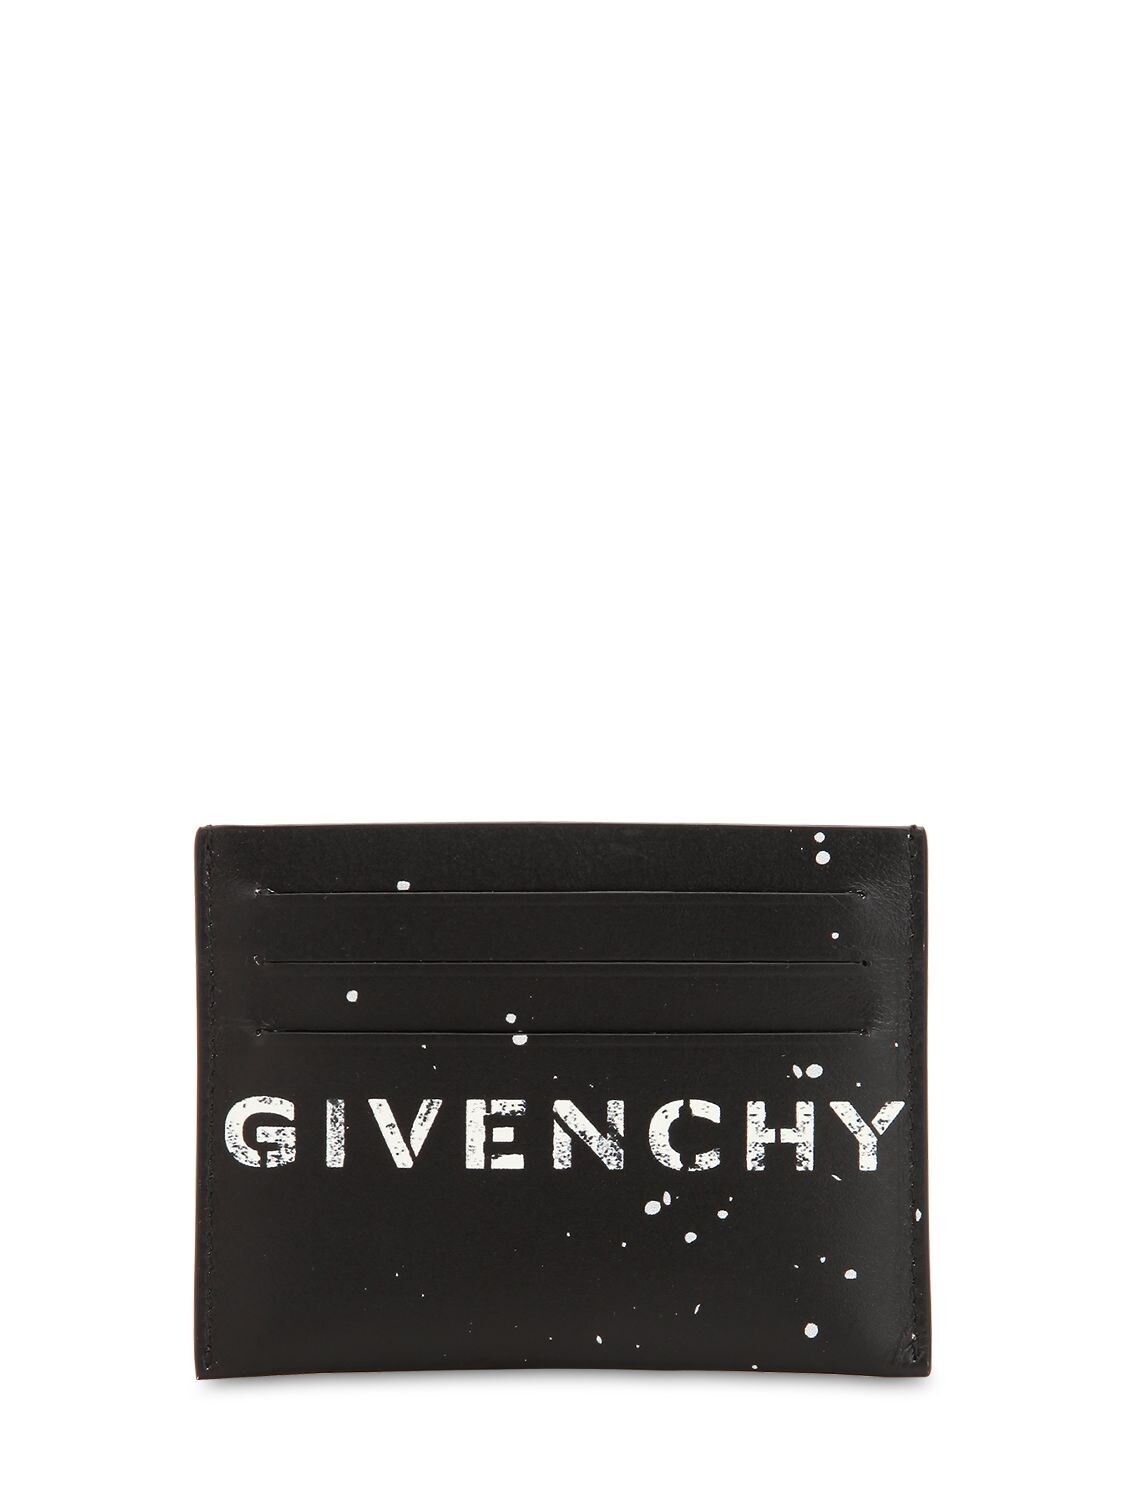 GIVENCHY PRINTED LEATHER CARD HOLDER,68IL4G007-MDA00